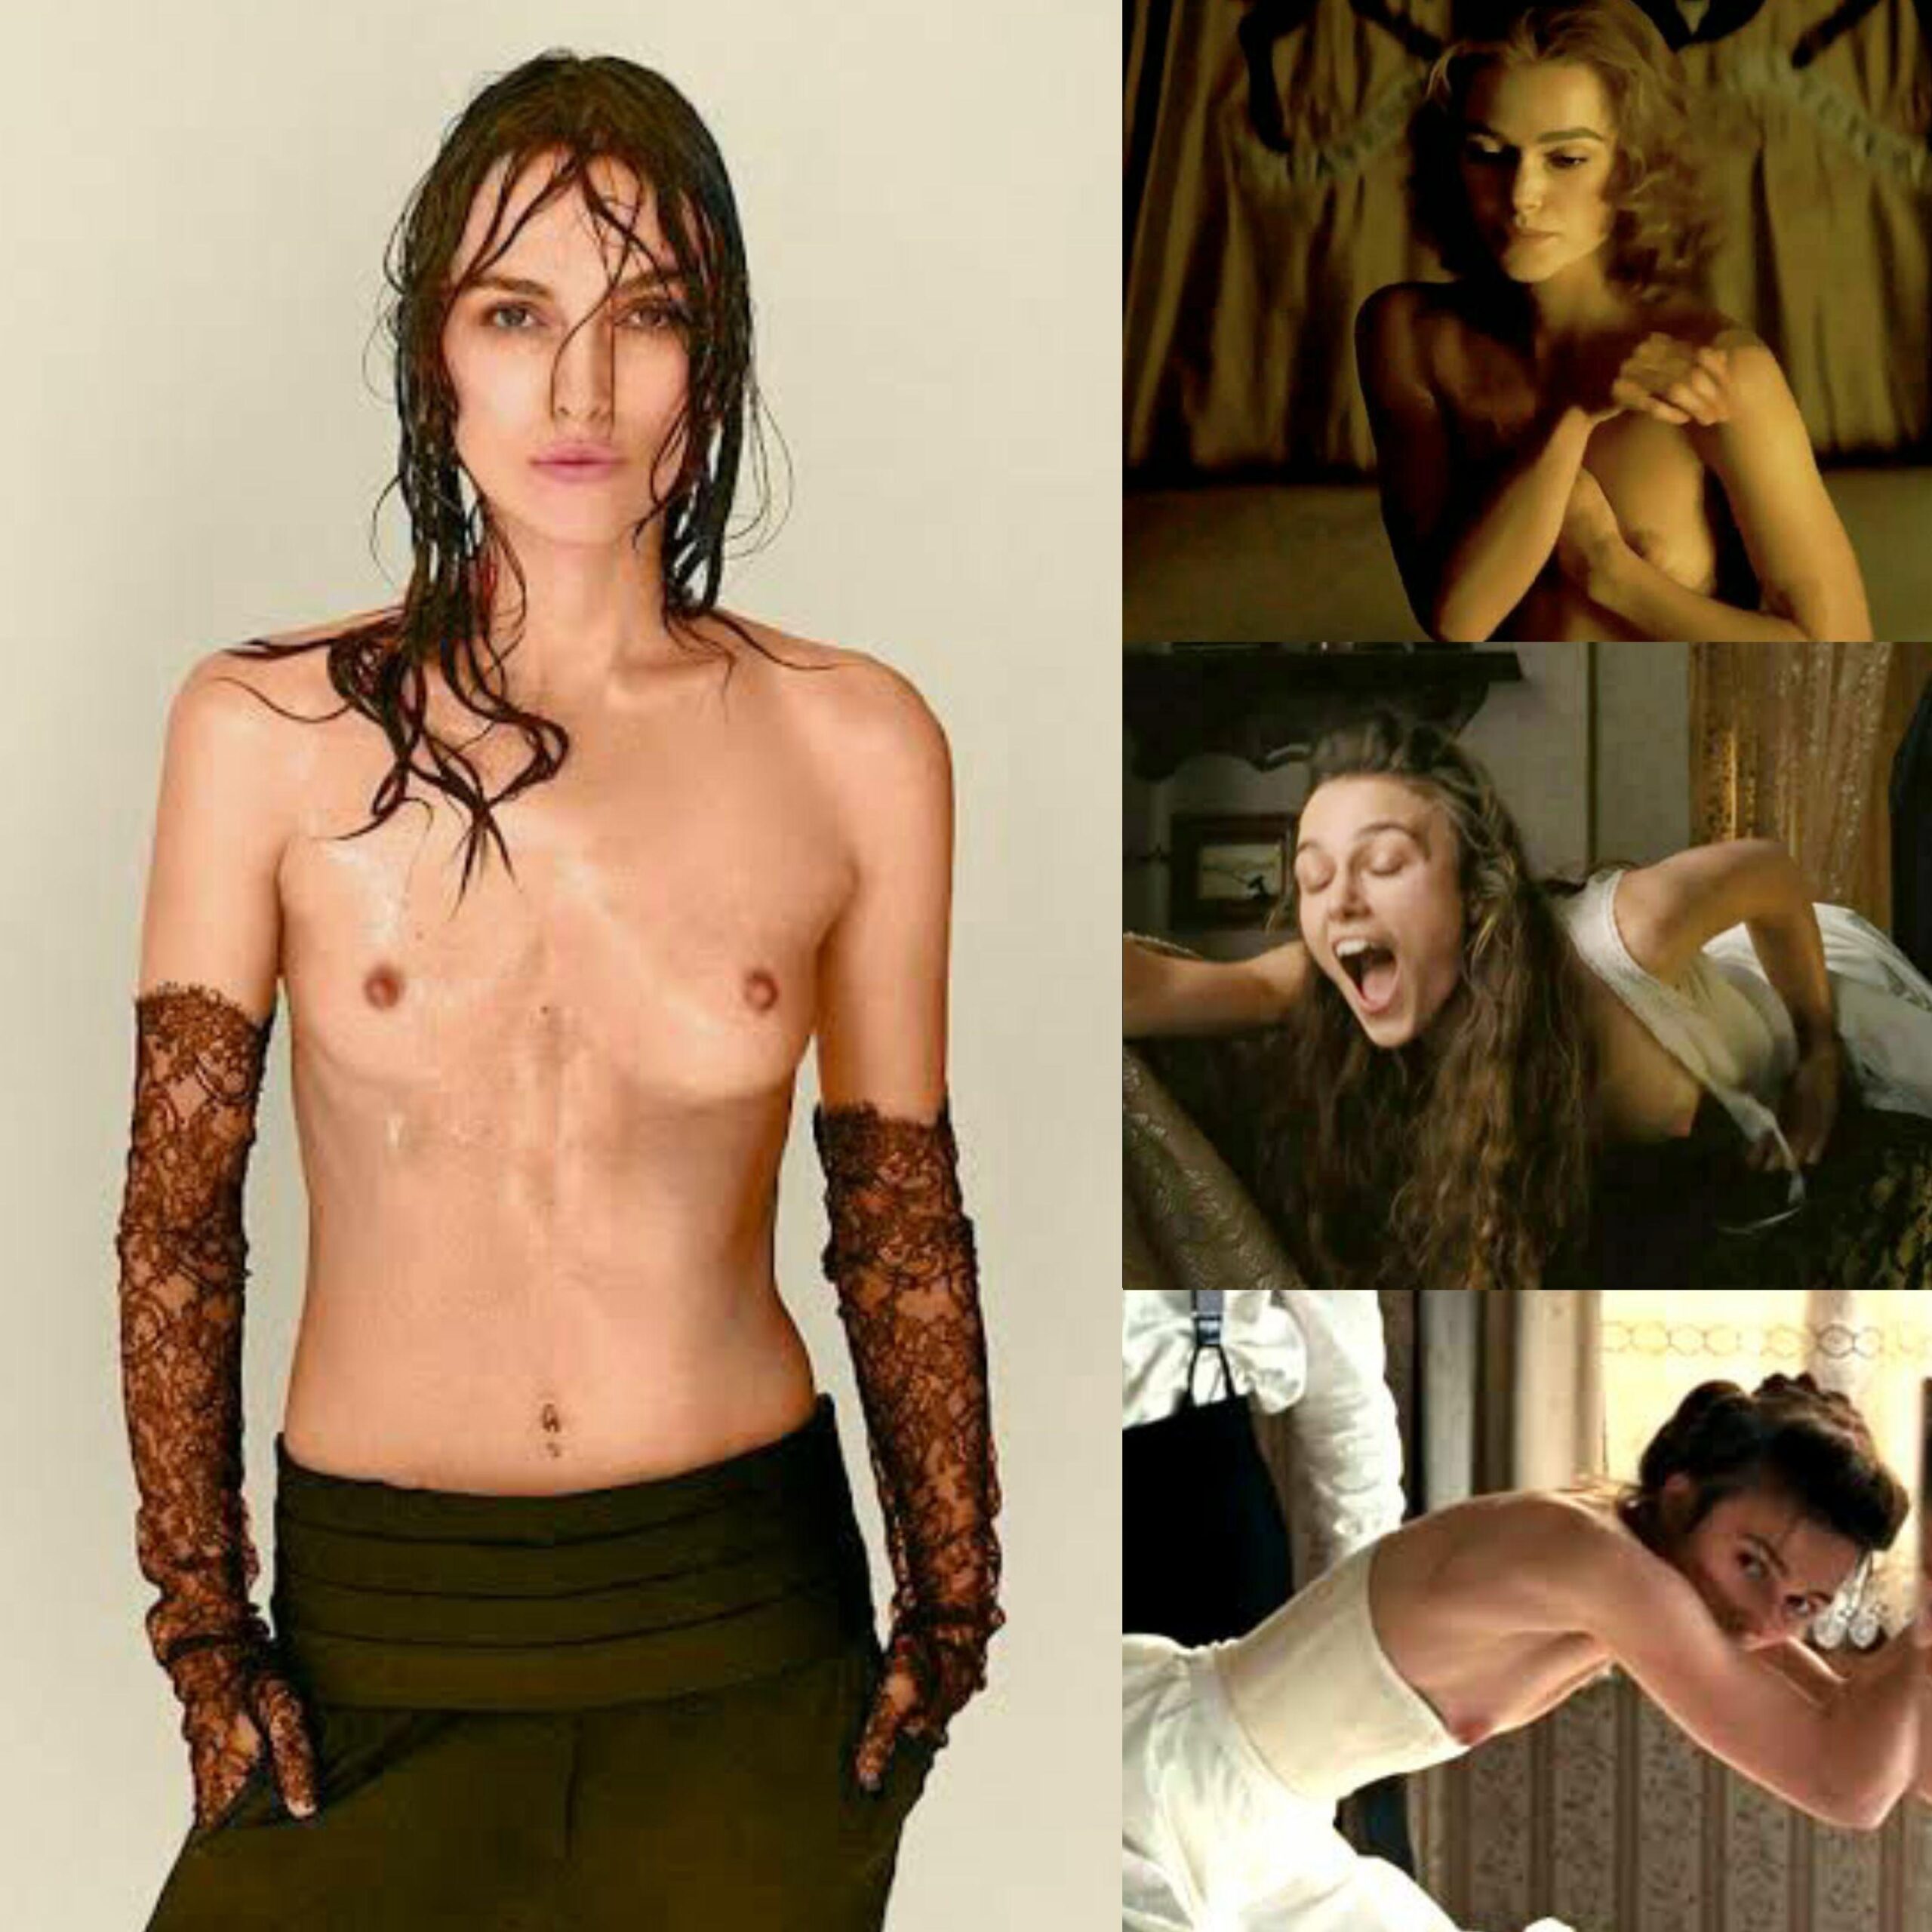 anthony gurganious recommends keira knightley nude photos pic